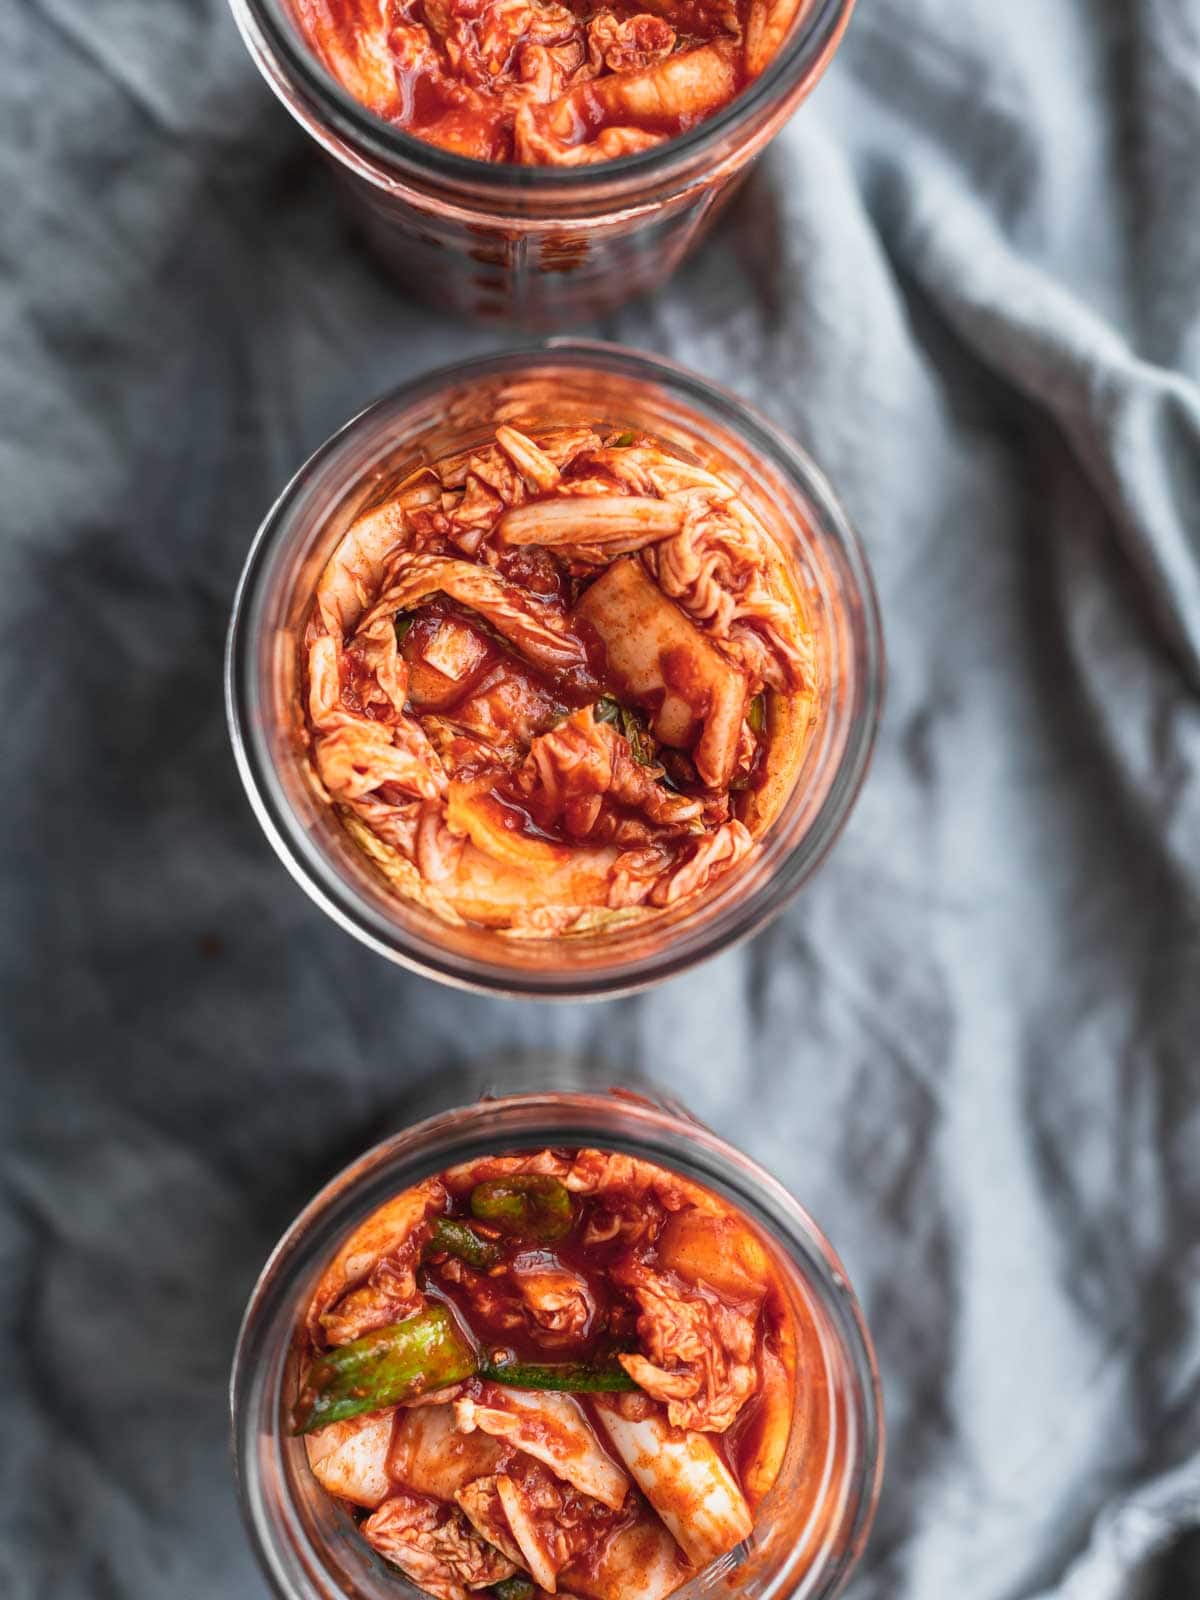 Homemade kimchi in jars on a blue textured cloth.